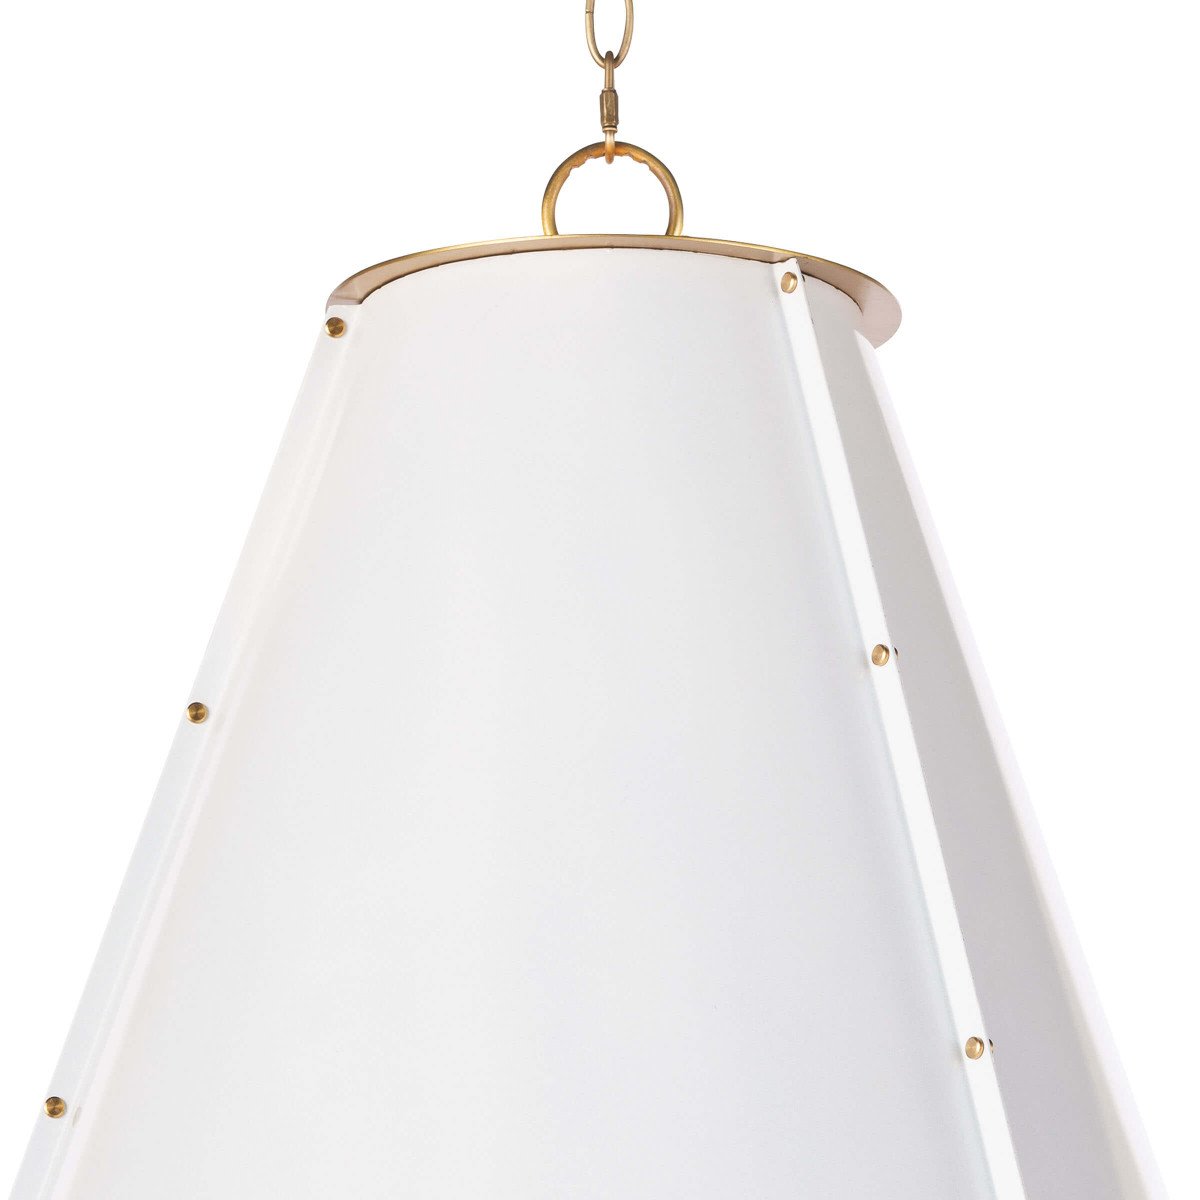 Dark steel shade with brass grommets -- this French Maid Pendant Large is packed with personality.  Size: 32" high x 25.5" diameter